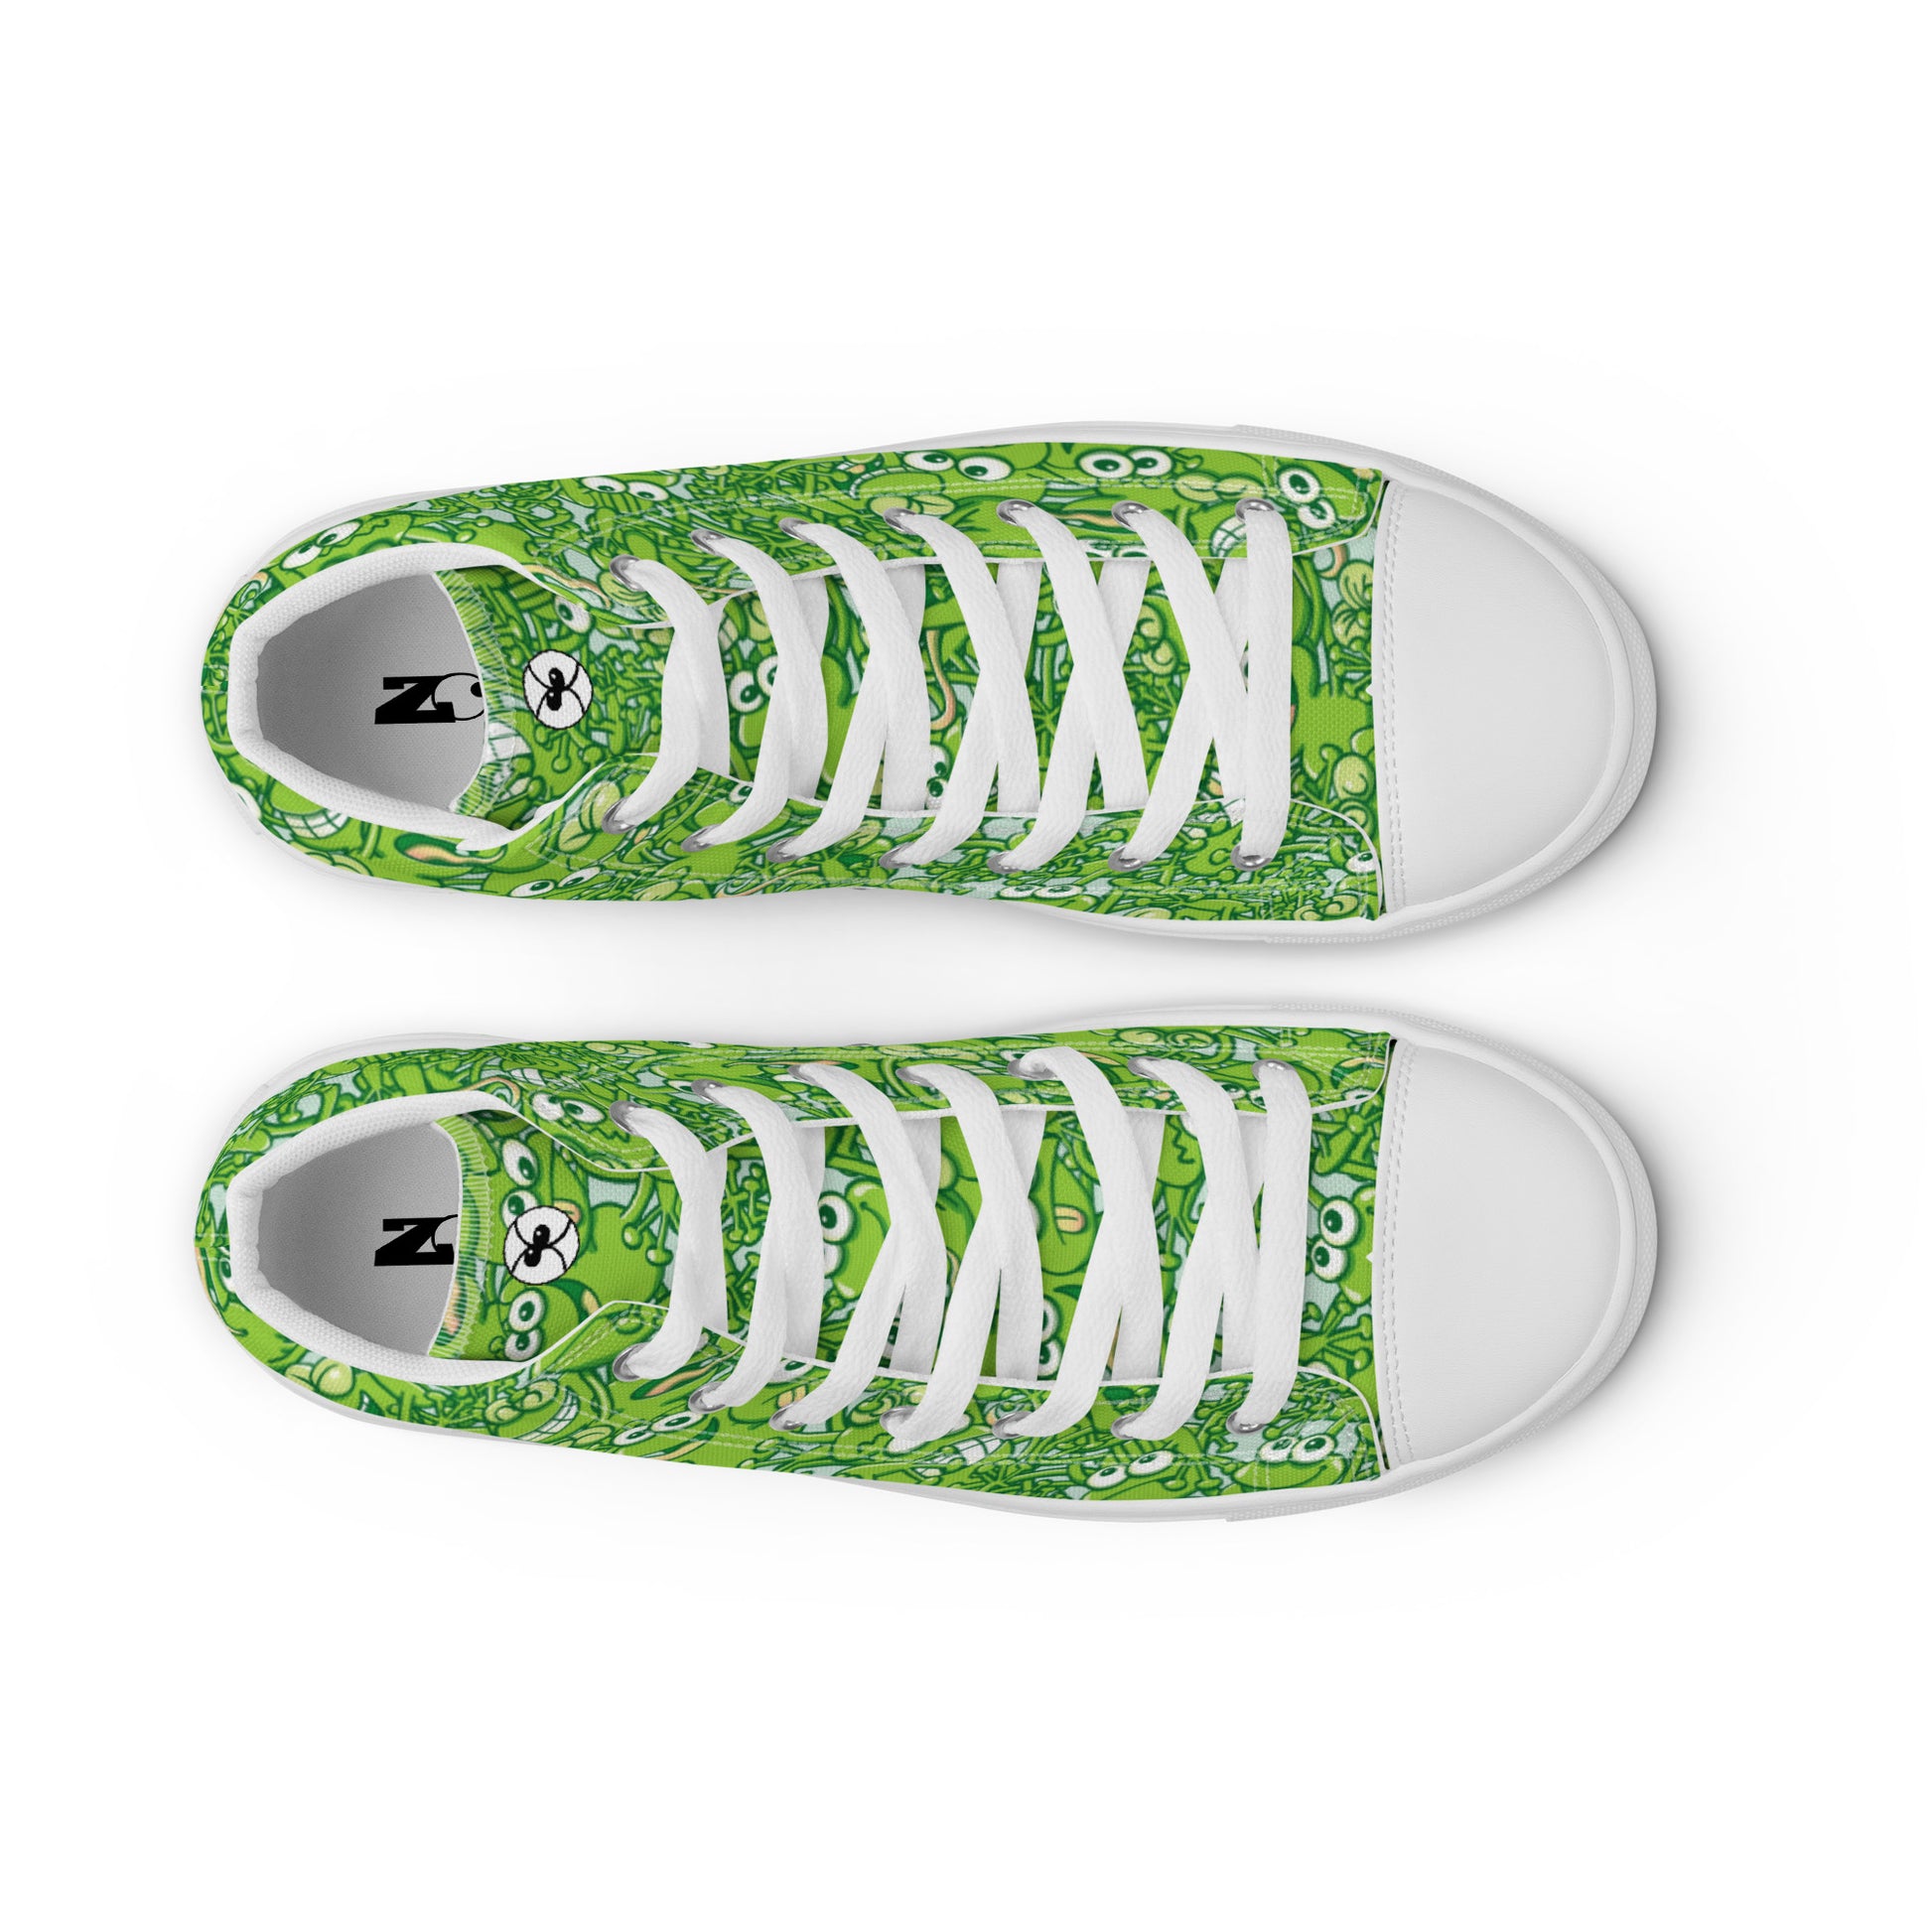 A tangled army of happy green frogs appears when the rain stops Women’s high top canvas shoes. Top view